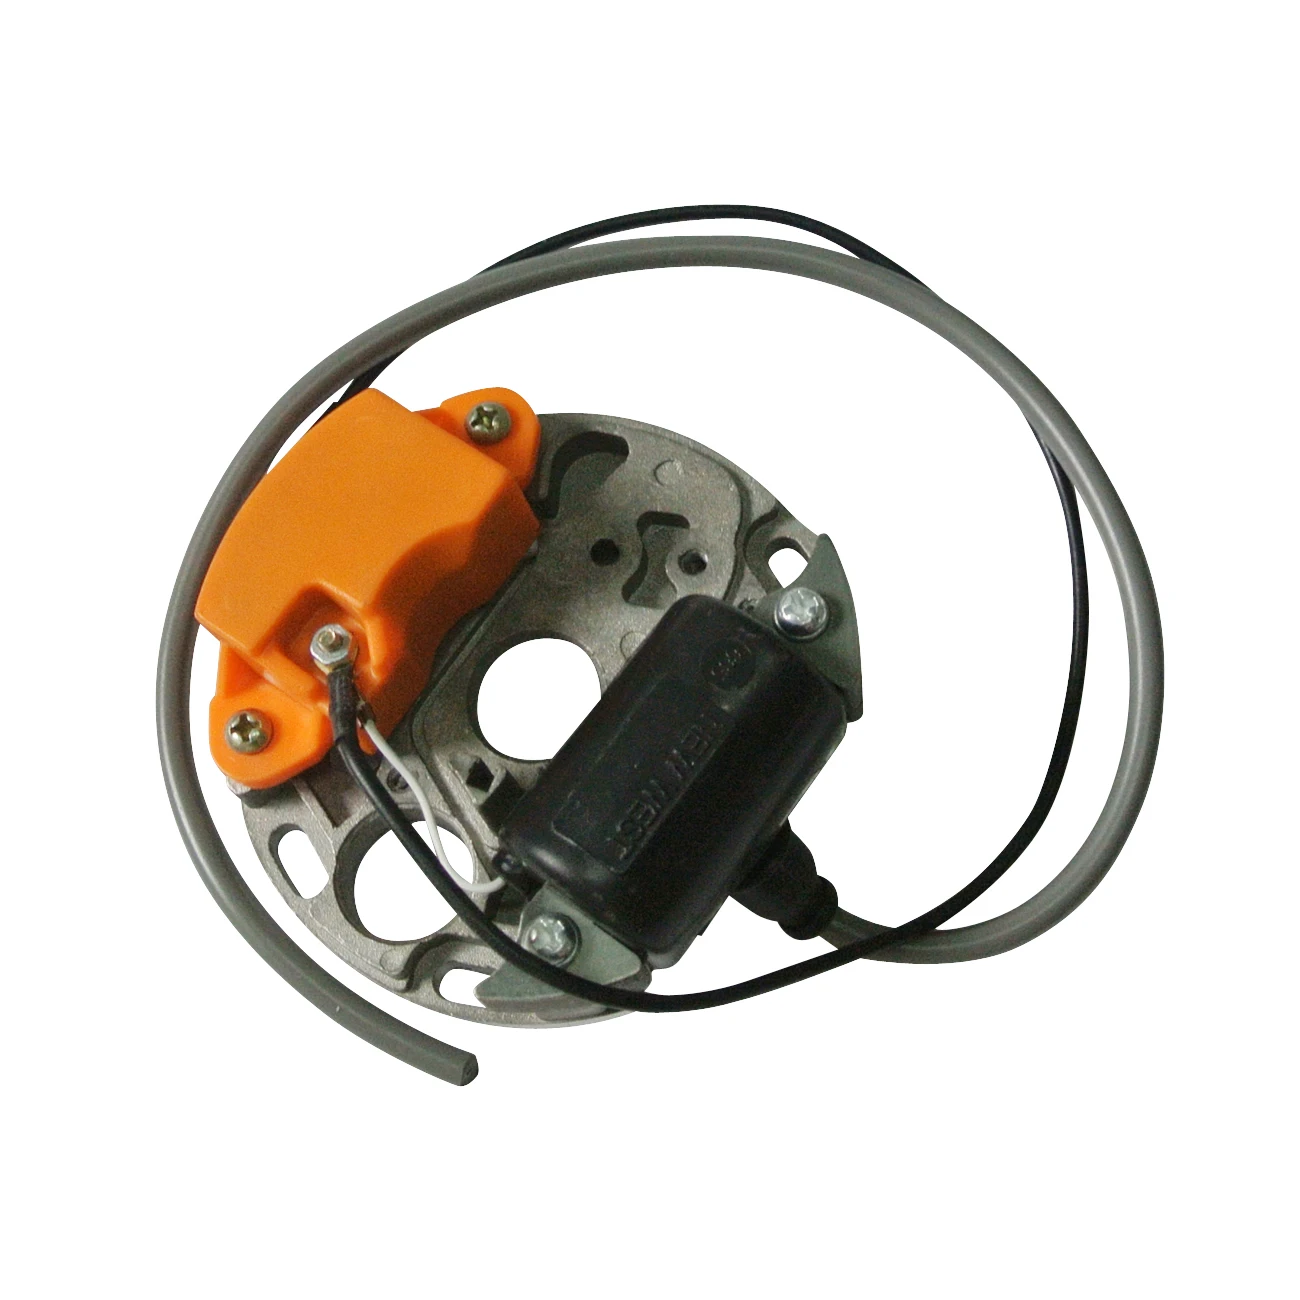 

Ignition Coil With Condenser For Stihl 070 090 Chainsaw 1106 400 0705 1106 404 3210 Stator Chainsaw Oem# 1106 400 0705